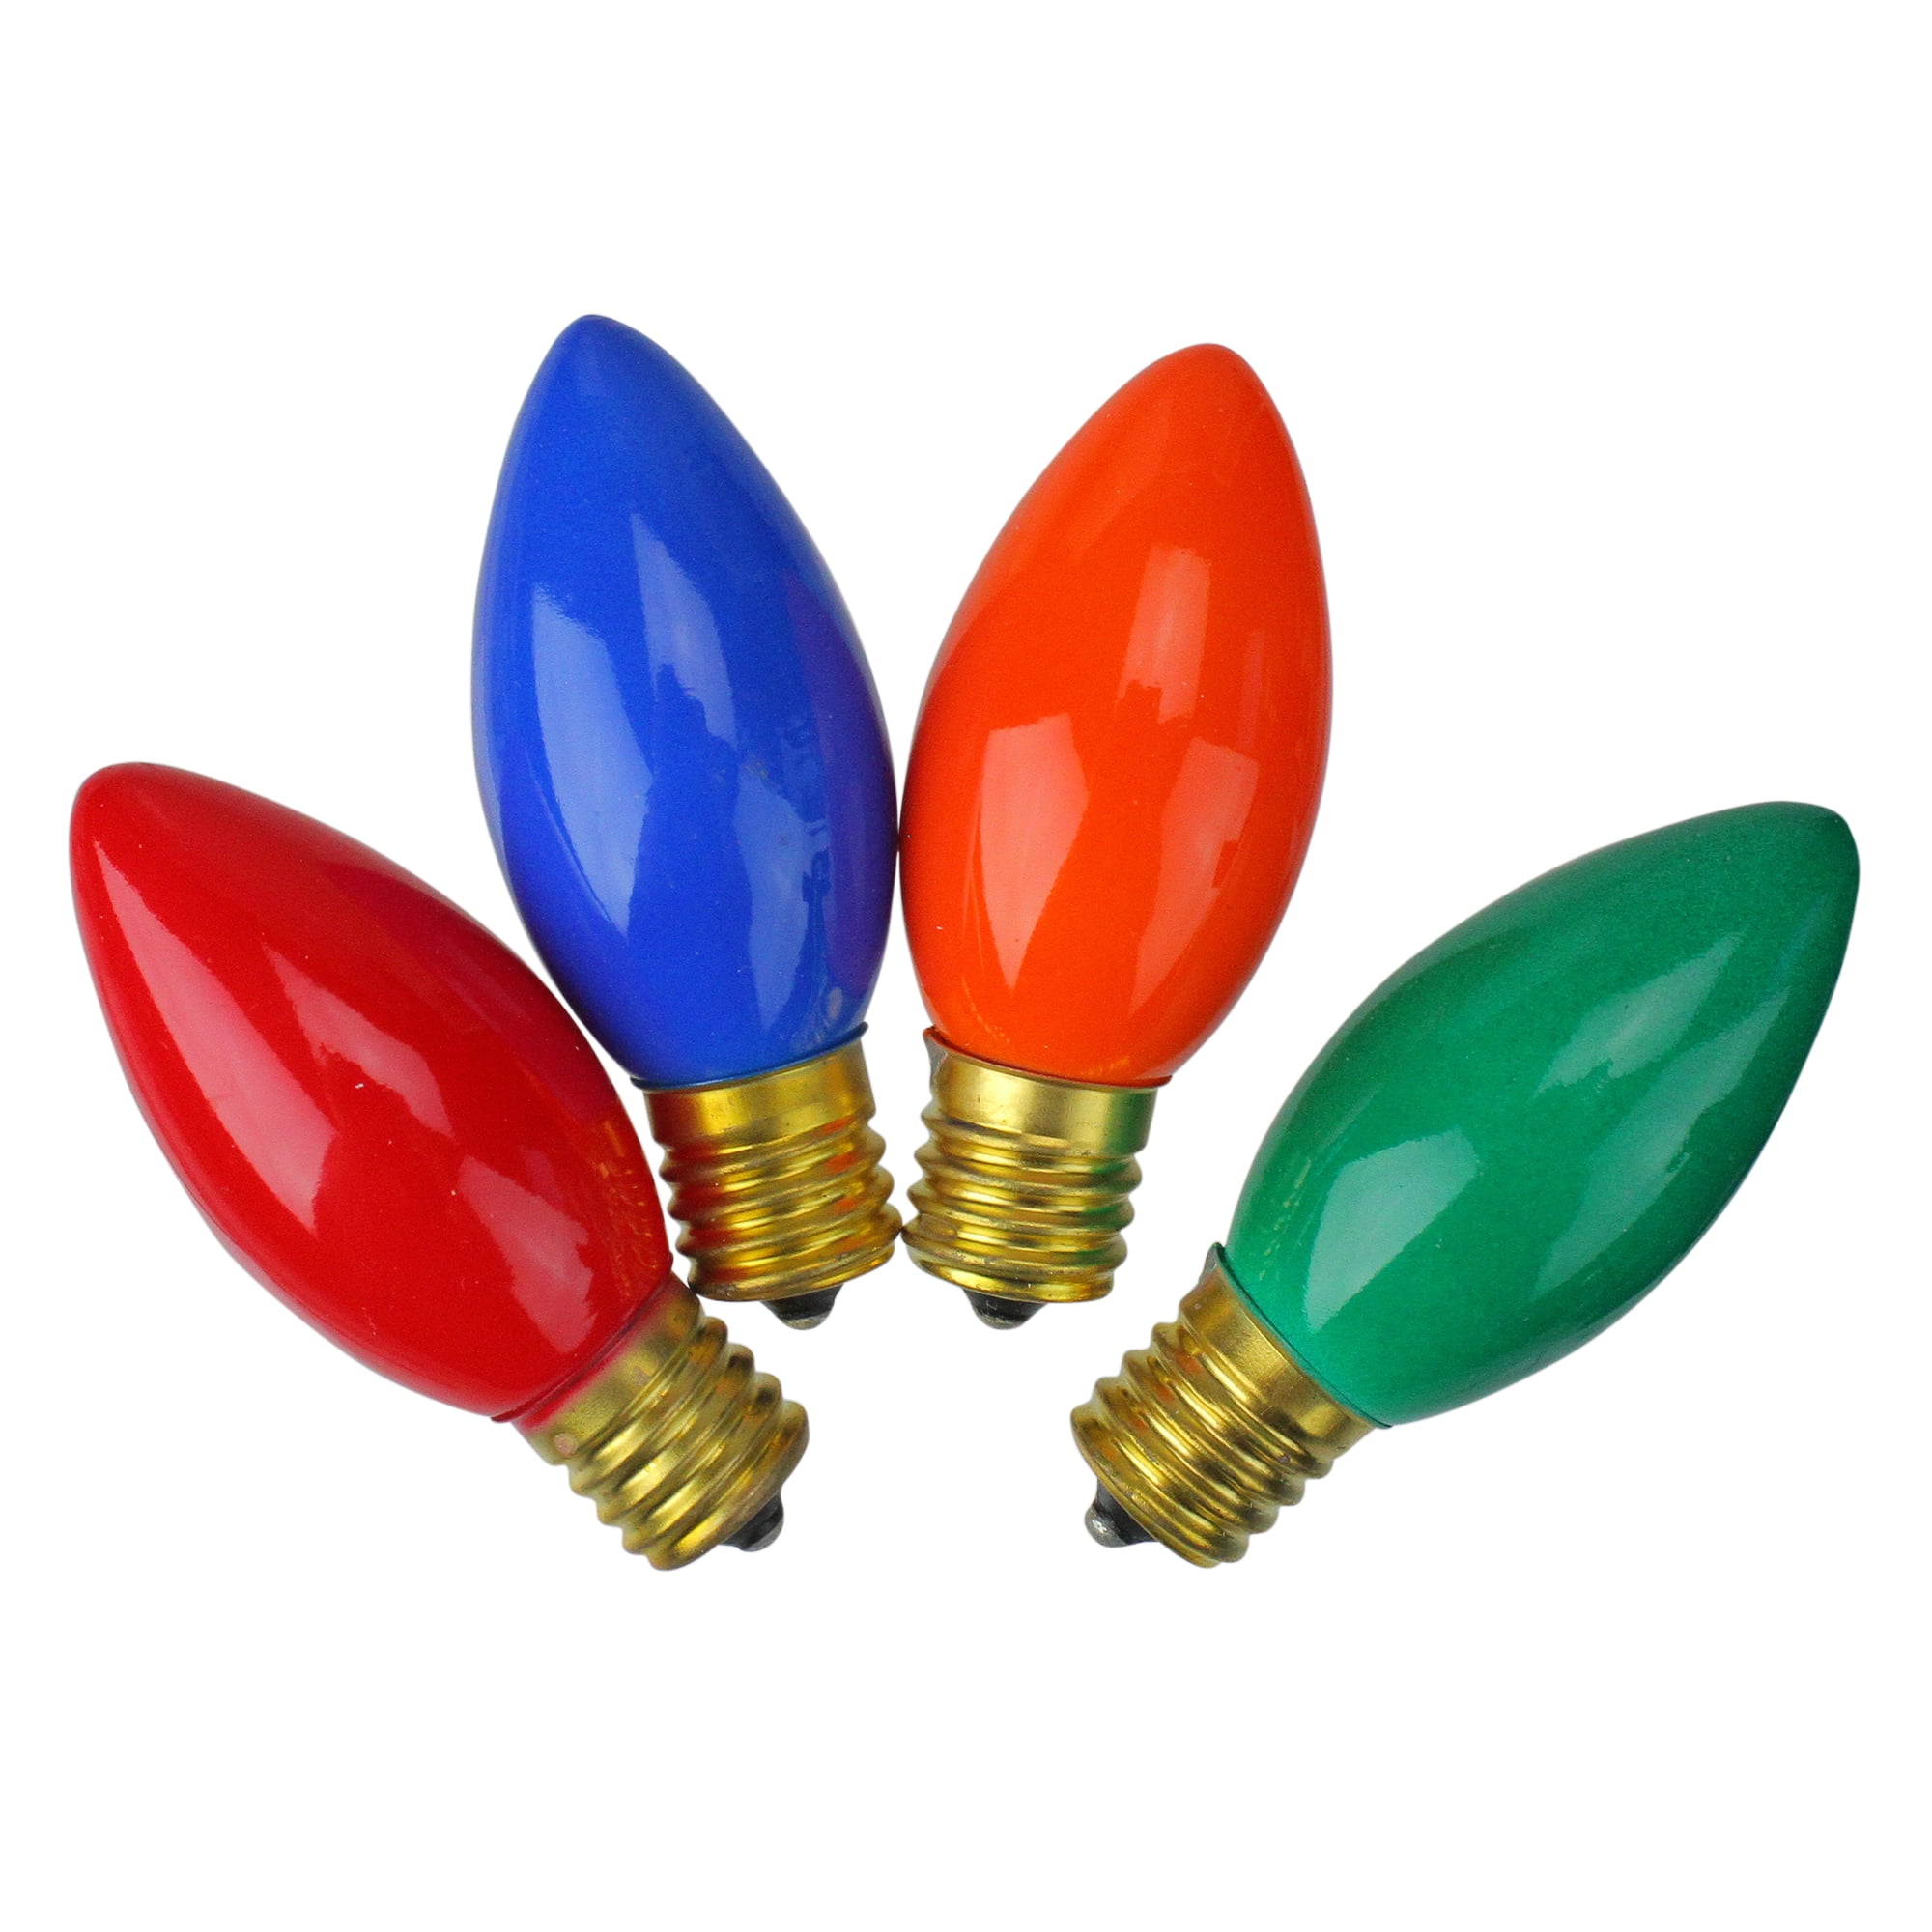 Pack of 4 MULTI-COLOR Ultra Bright LED C9 CHRISTMAS Replacement Bulbs new 